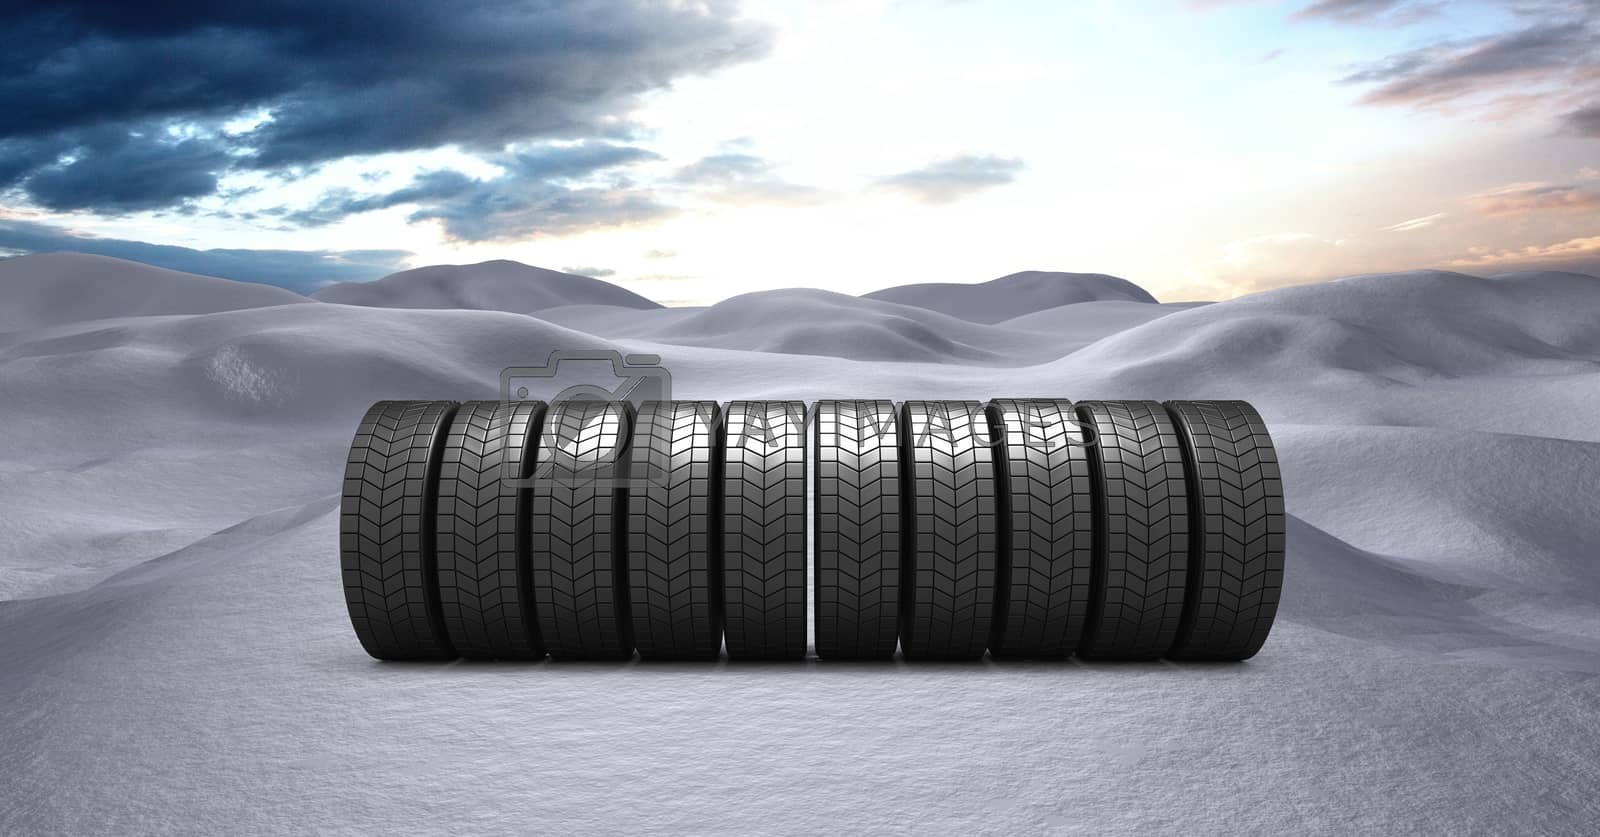 Royalty free image of Tyres in Winter snow landscape by Wavebreakmedia